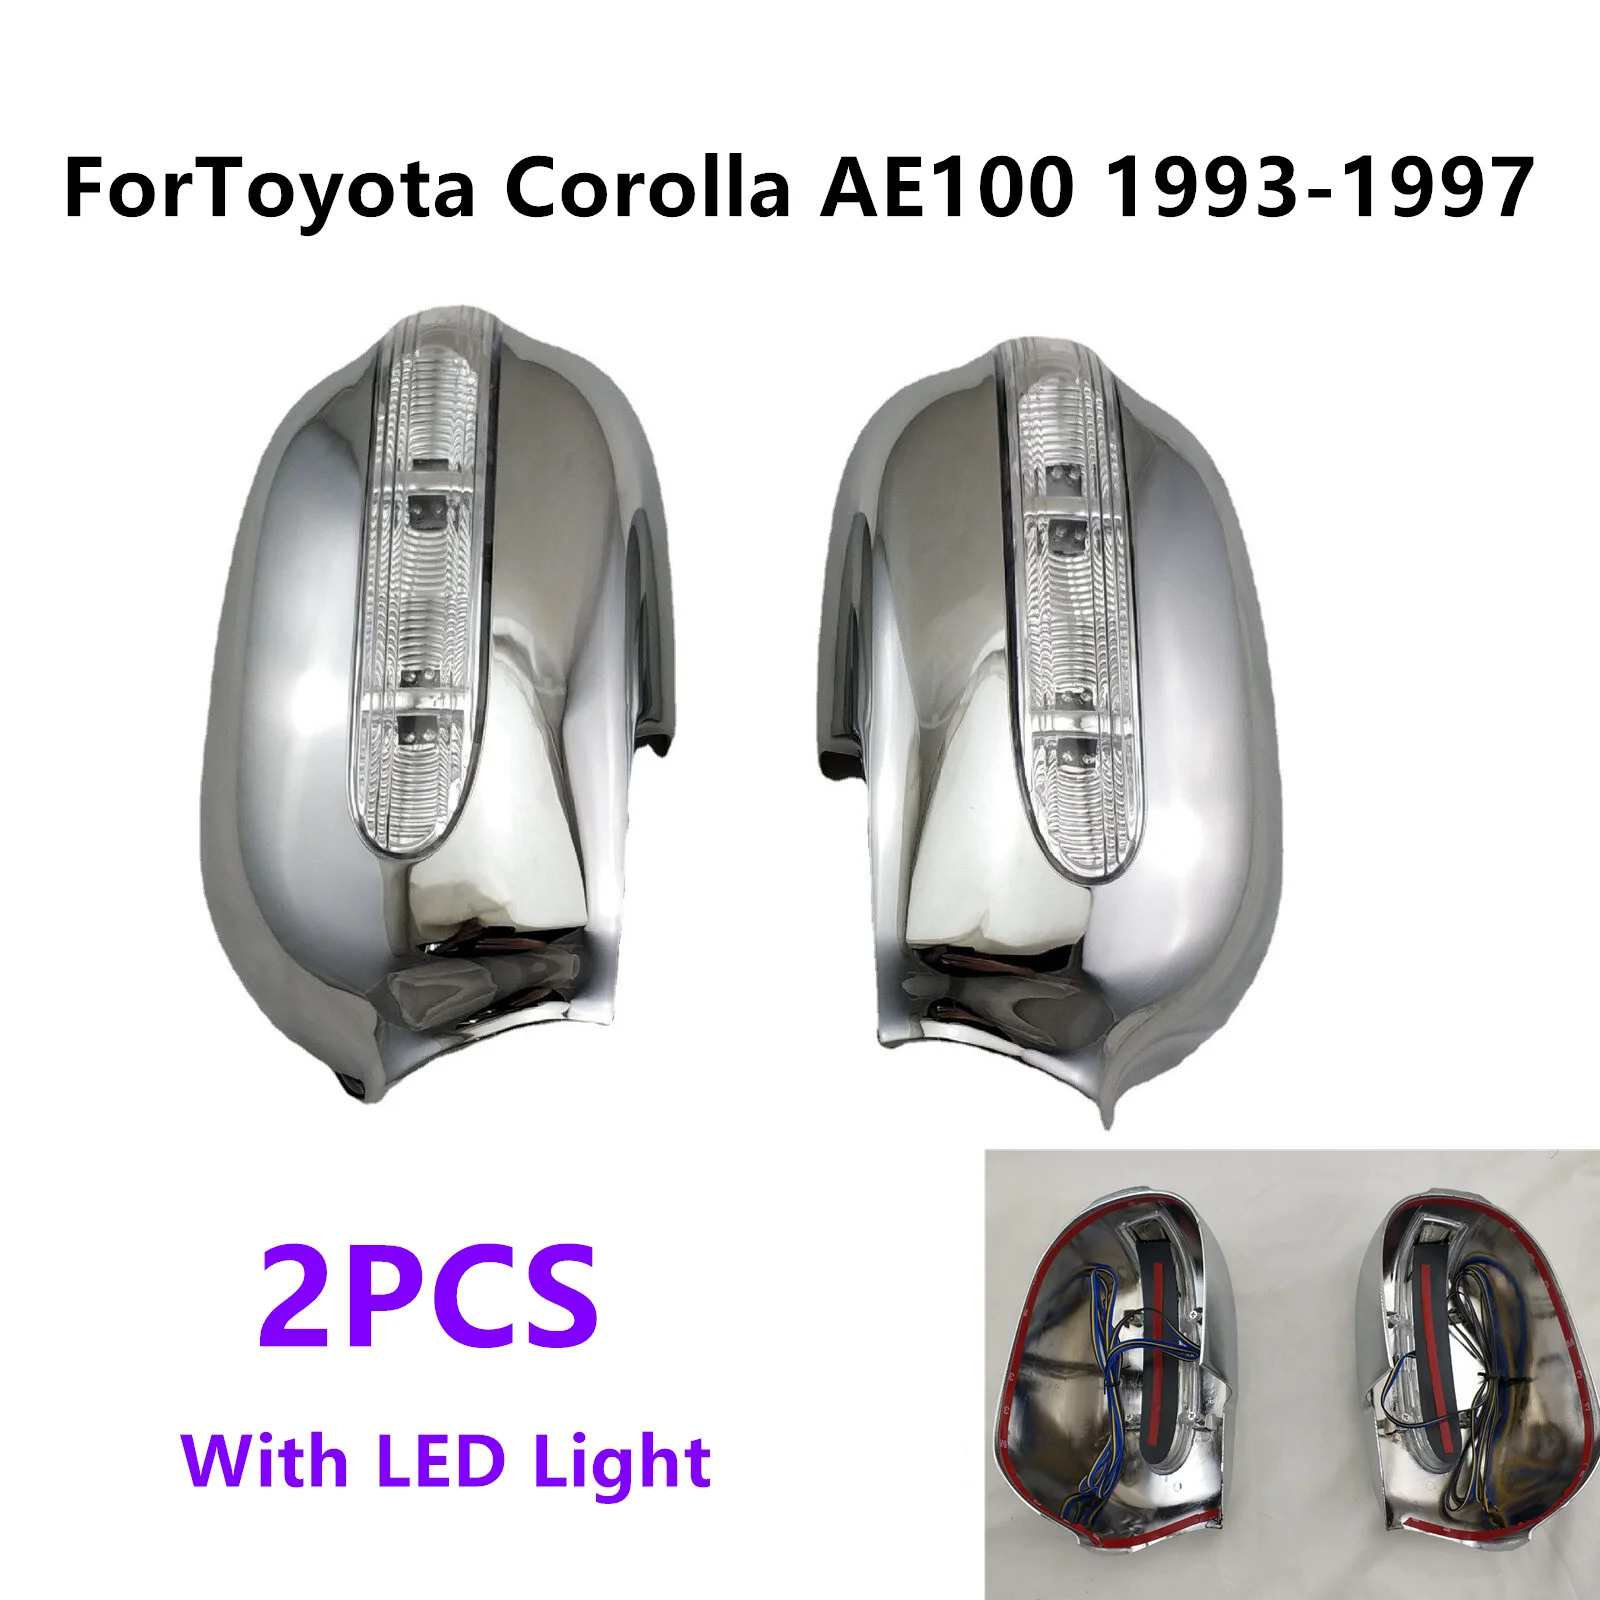 

2Pcs Side Mirror Cover Trim With LED Light Caps Housing Shell Decor For Toyota Corolla AE100 1993 1994 1995 1996 1997